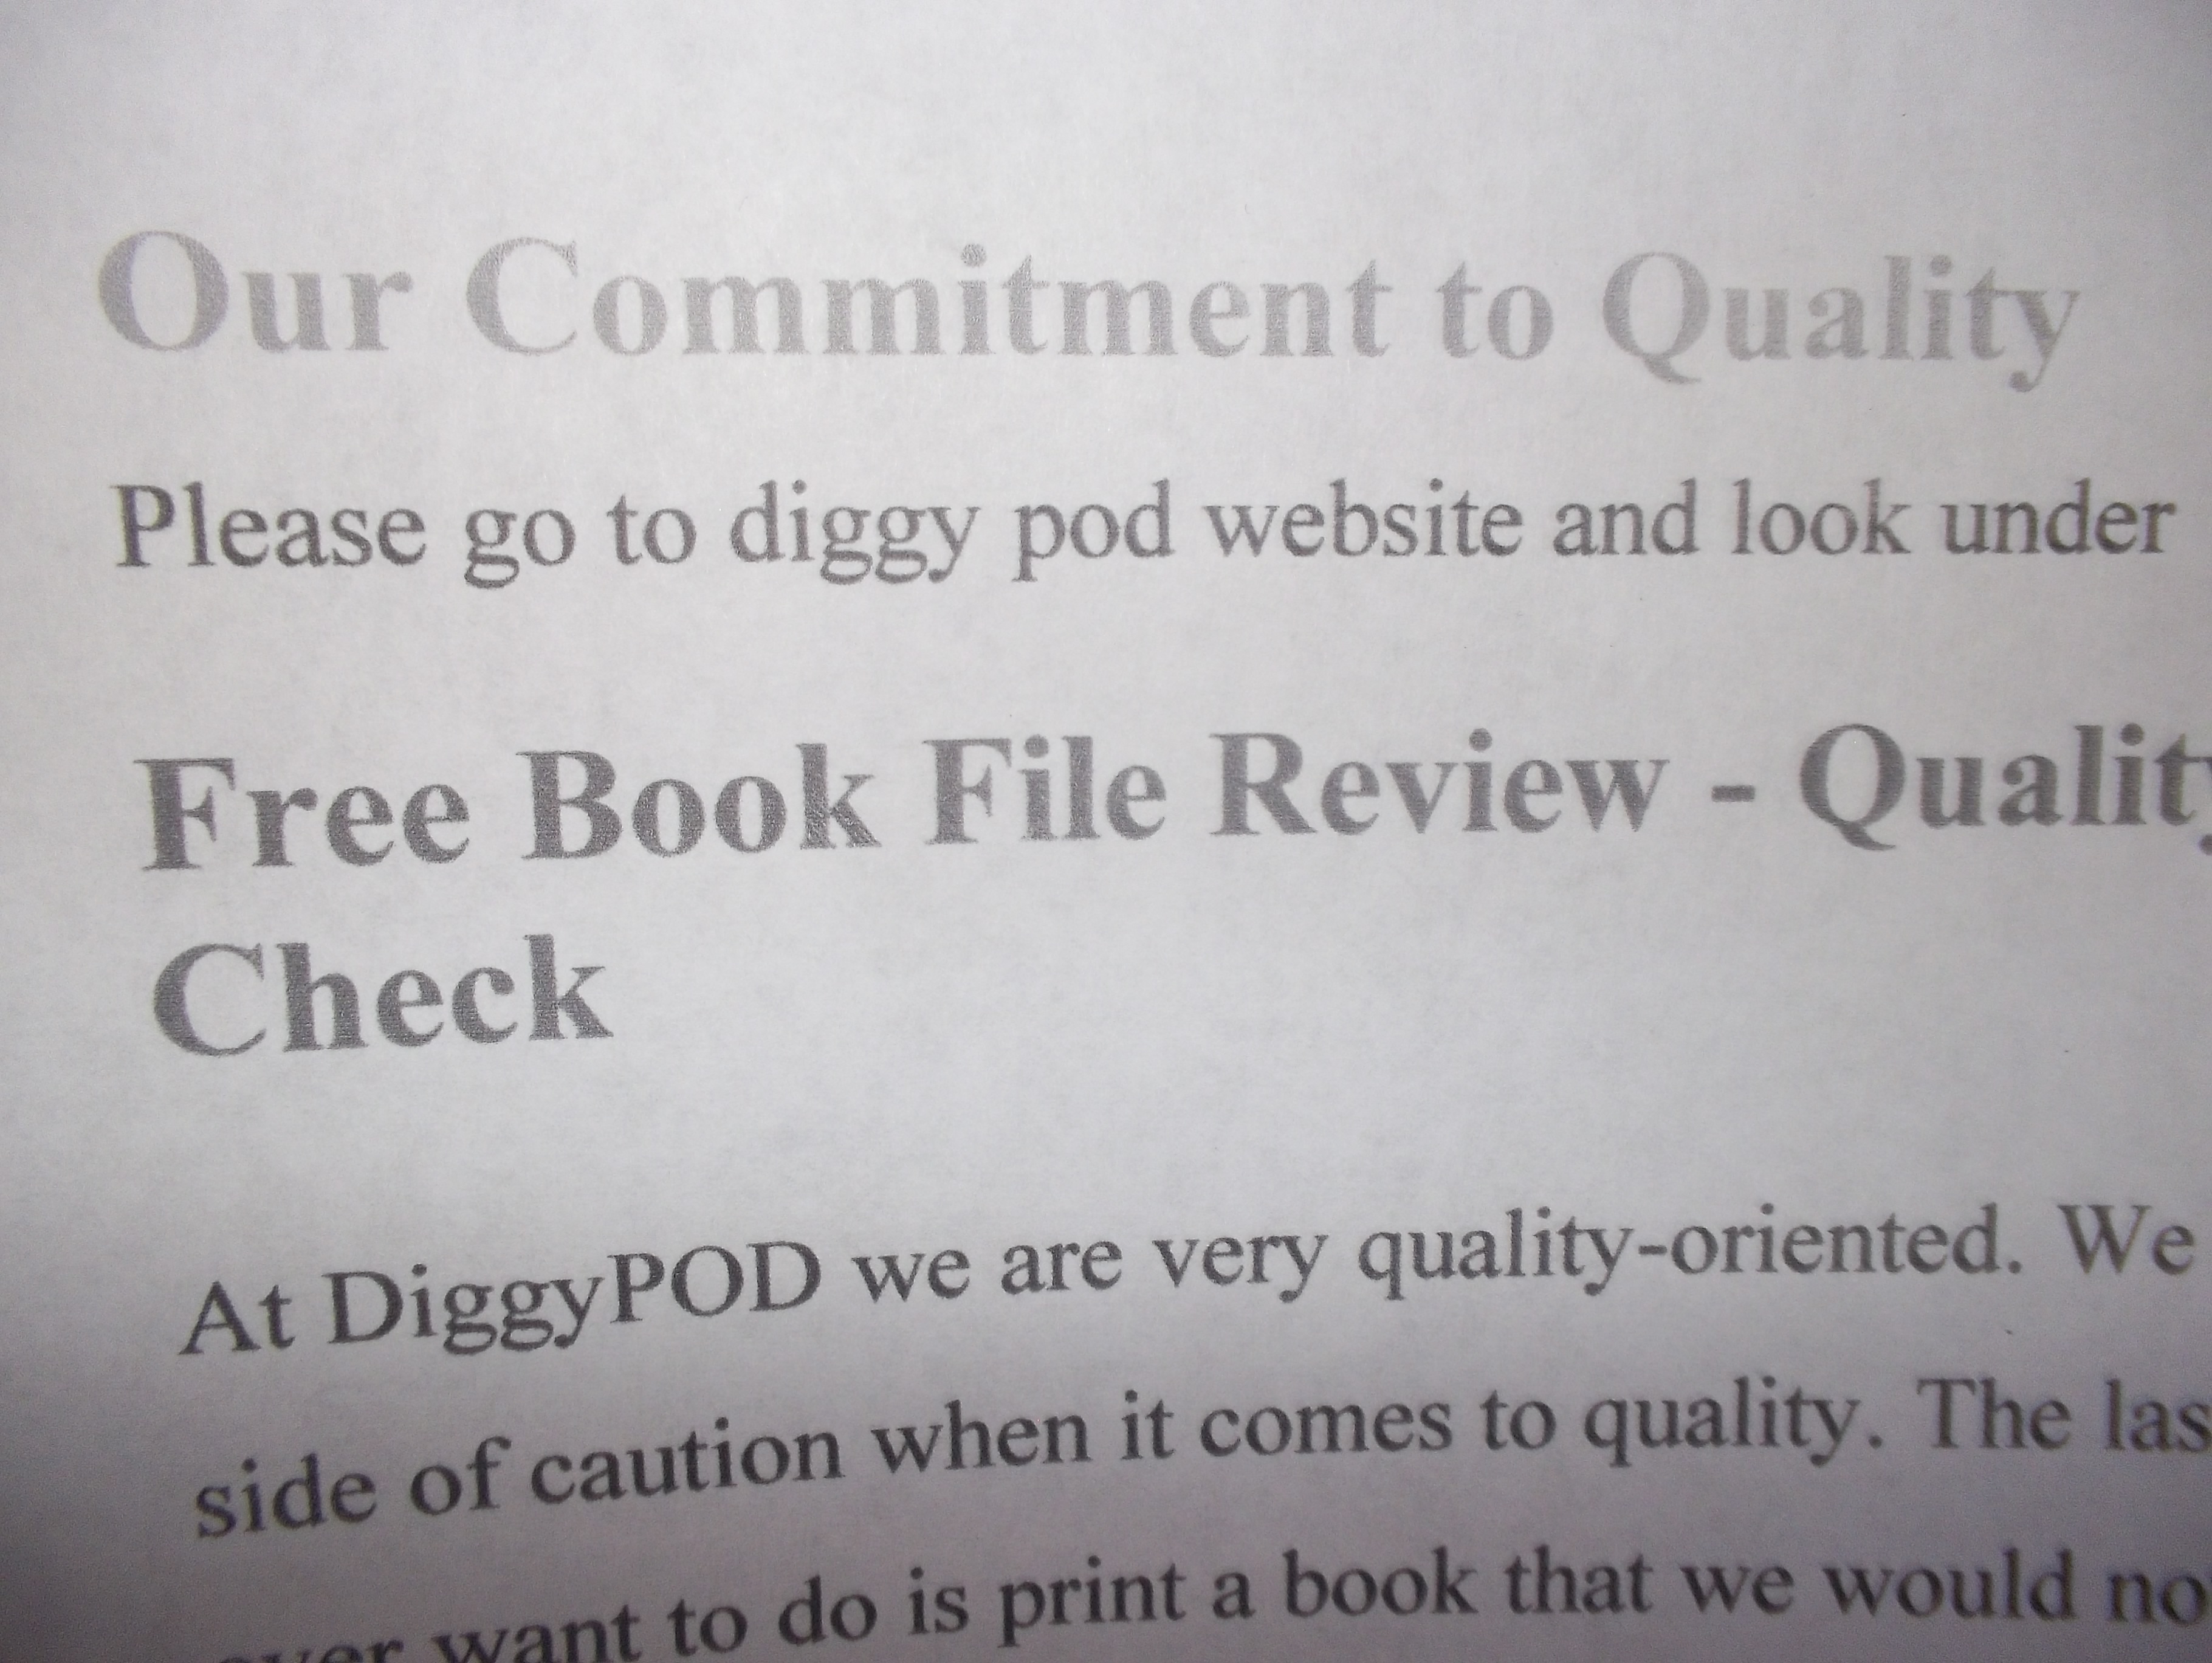 Diggy Pod commitment to Quality